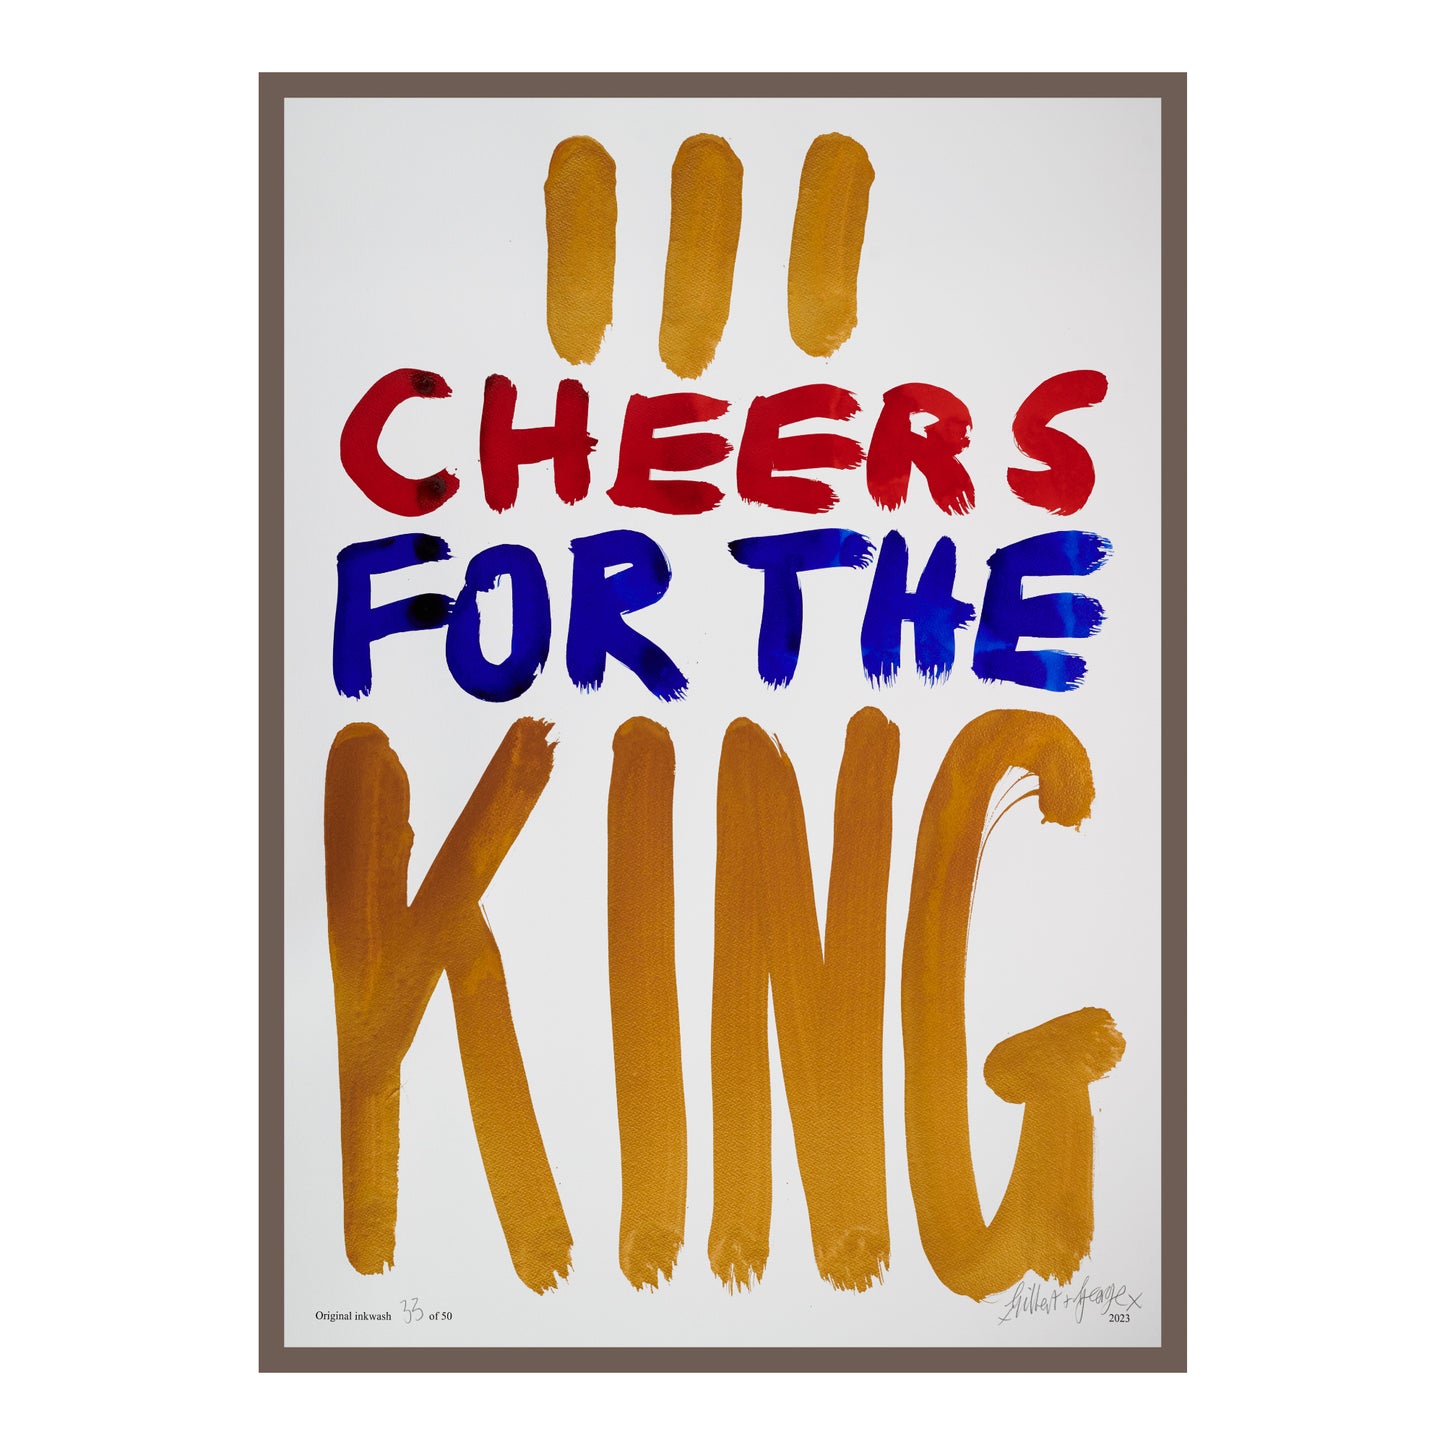 III CHEERS FOR THE KING (v)